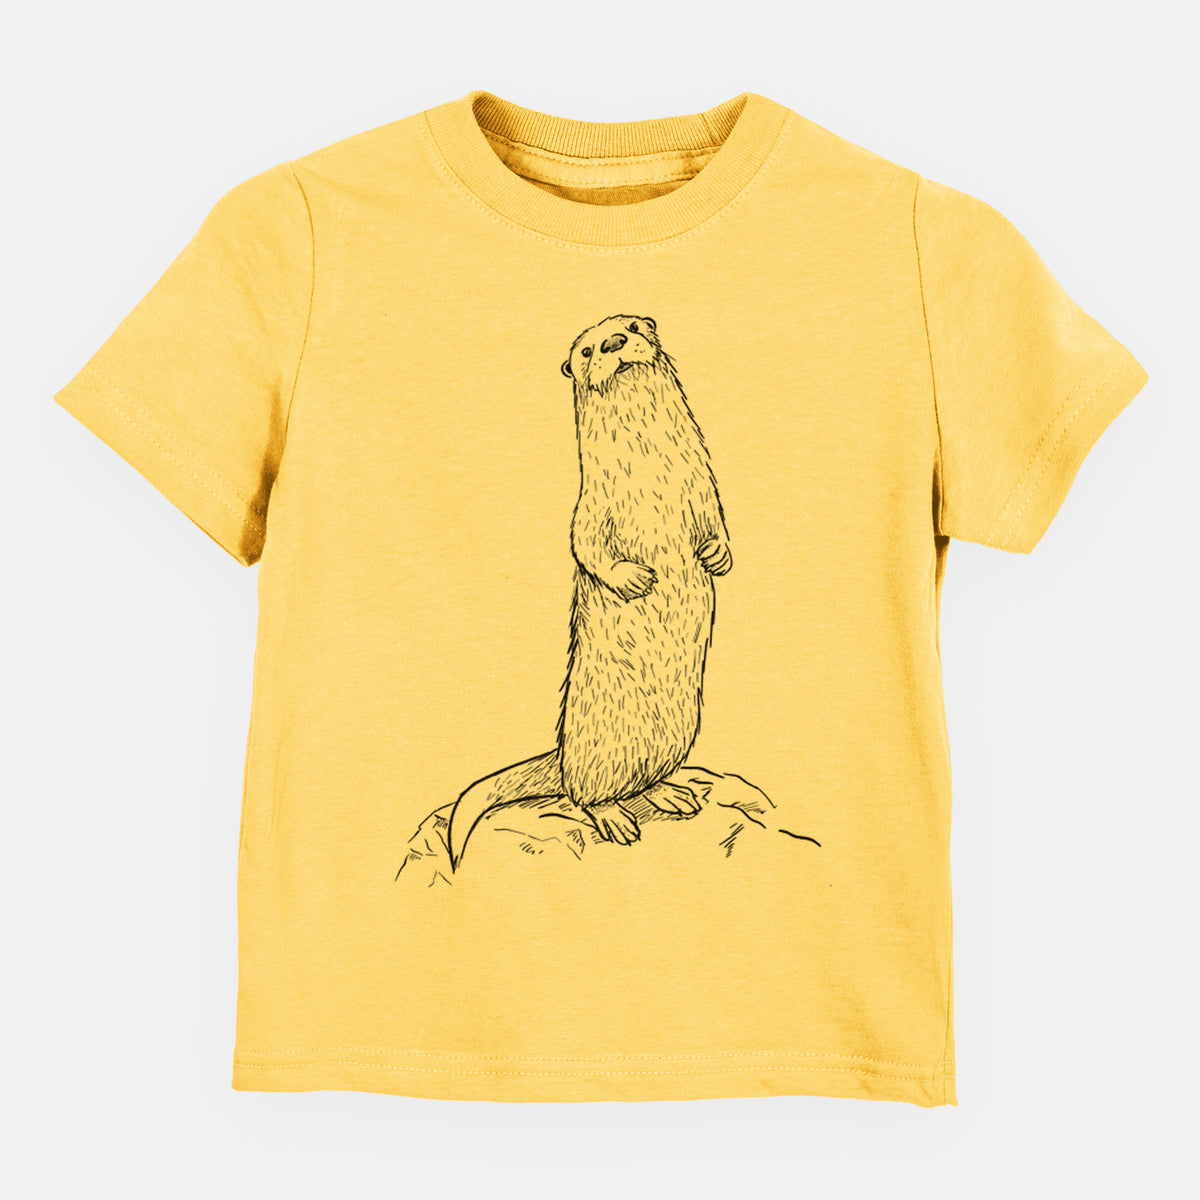 North American River Otter - Lontra canadensis - Kids Shirt